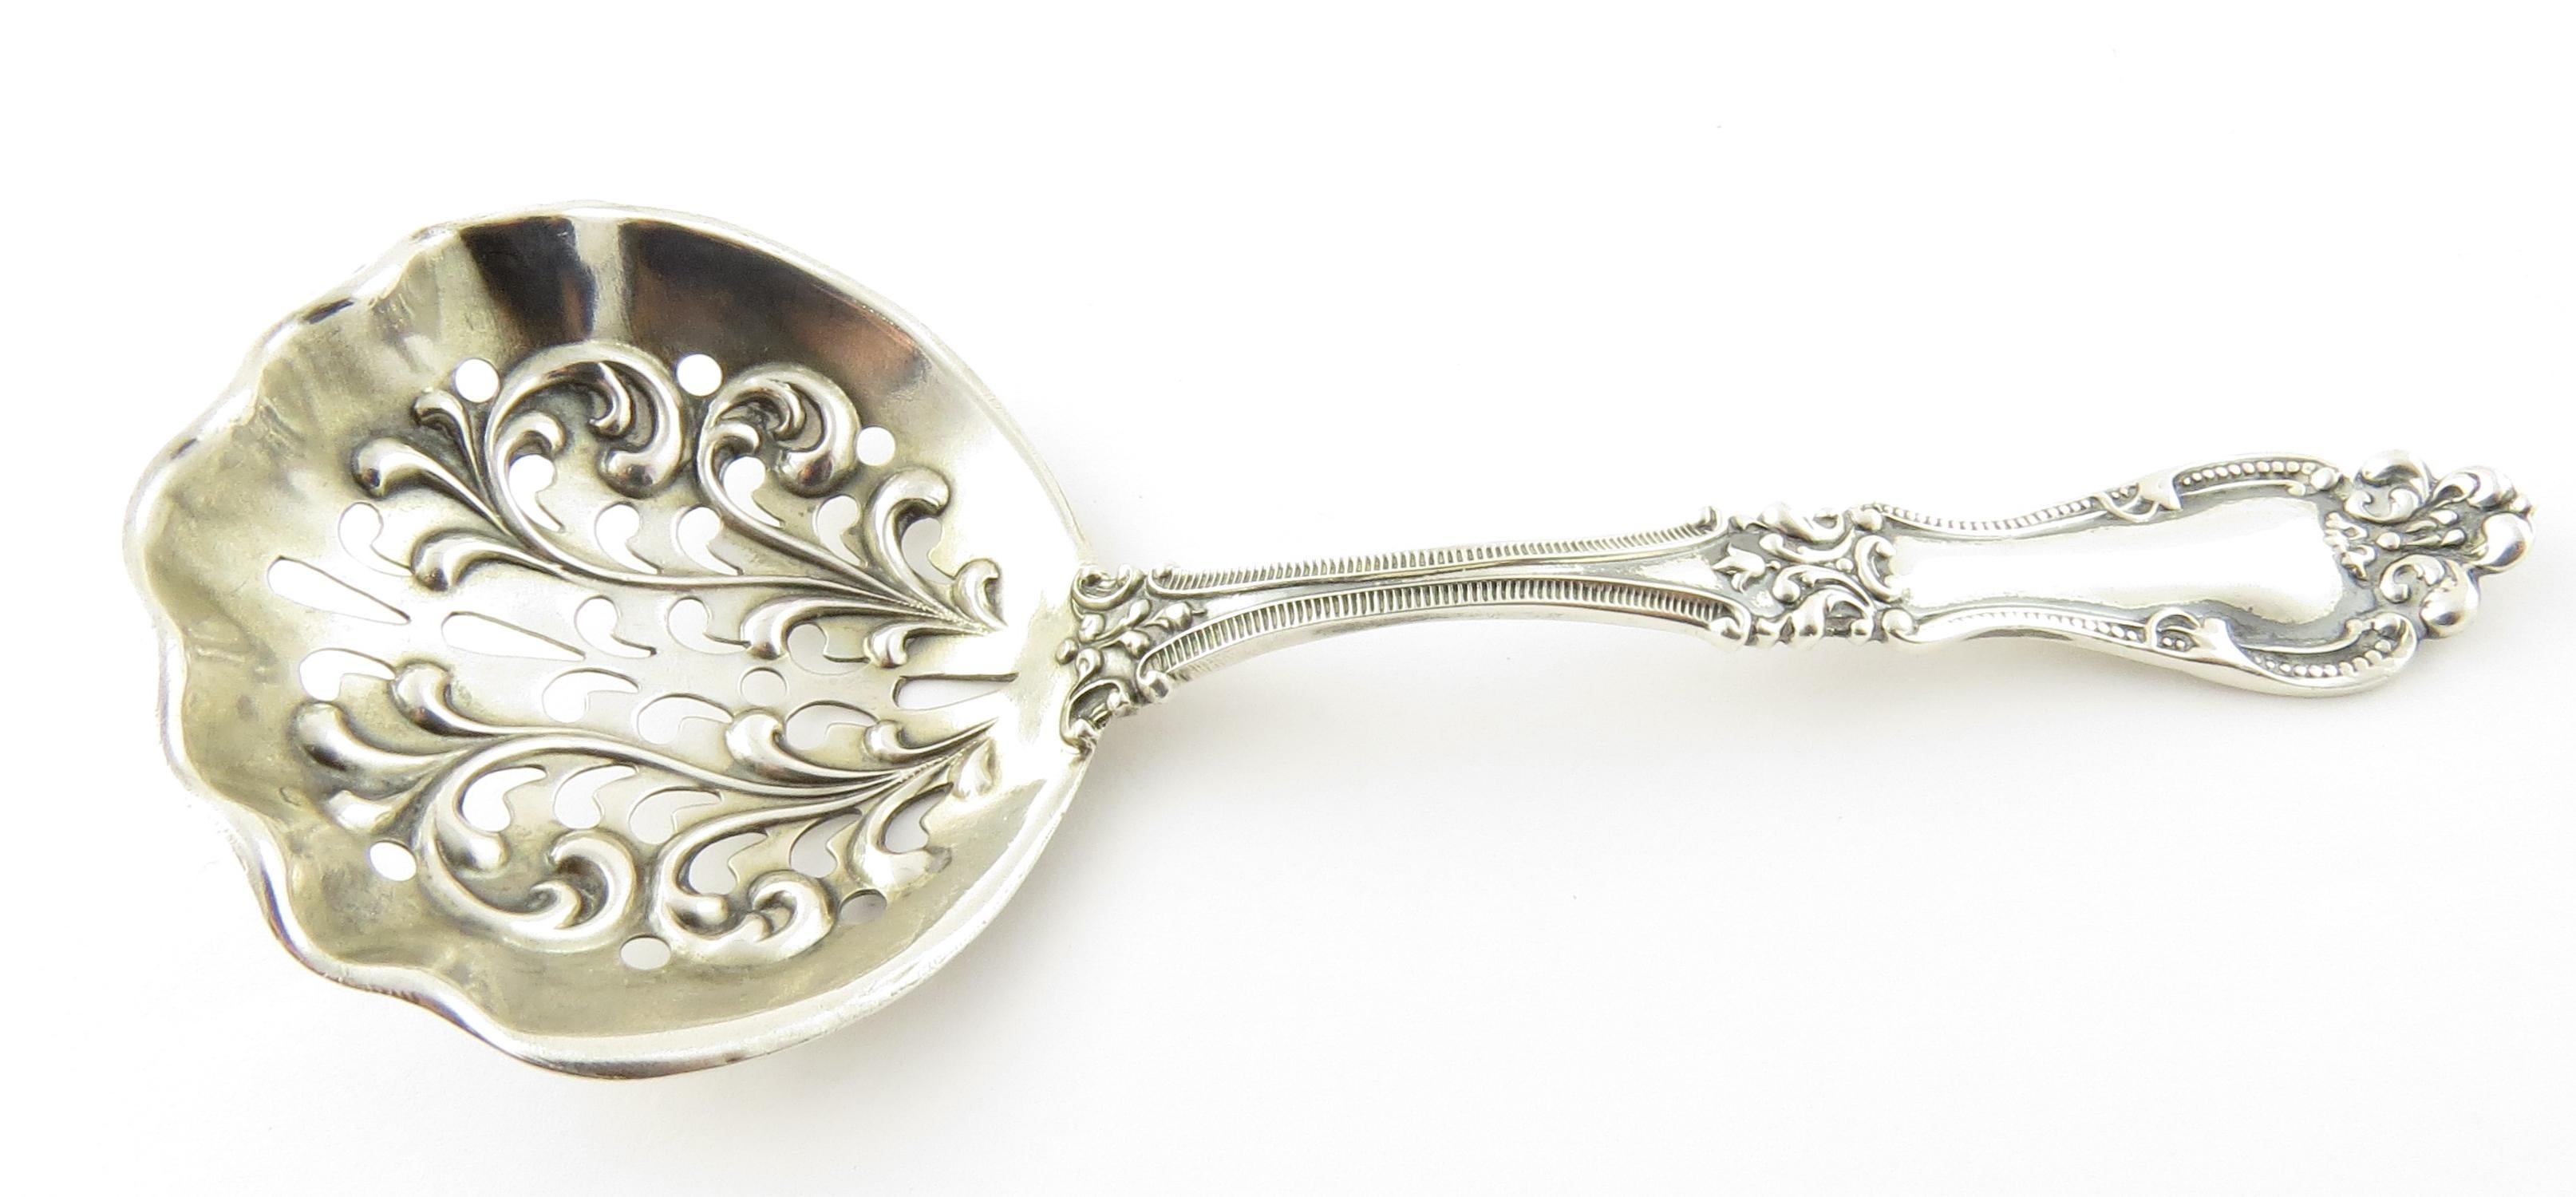 Blackinton Sterling silver bon bon spoon in the 1900 Helena pattern. 
Marked: B with sword through it, STERLING. 
No monogram. 
Measures 4 3/4